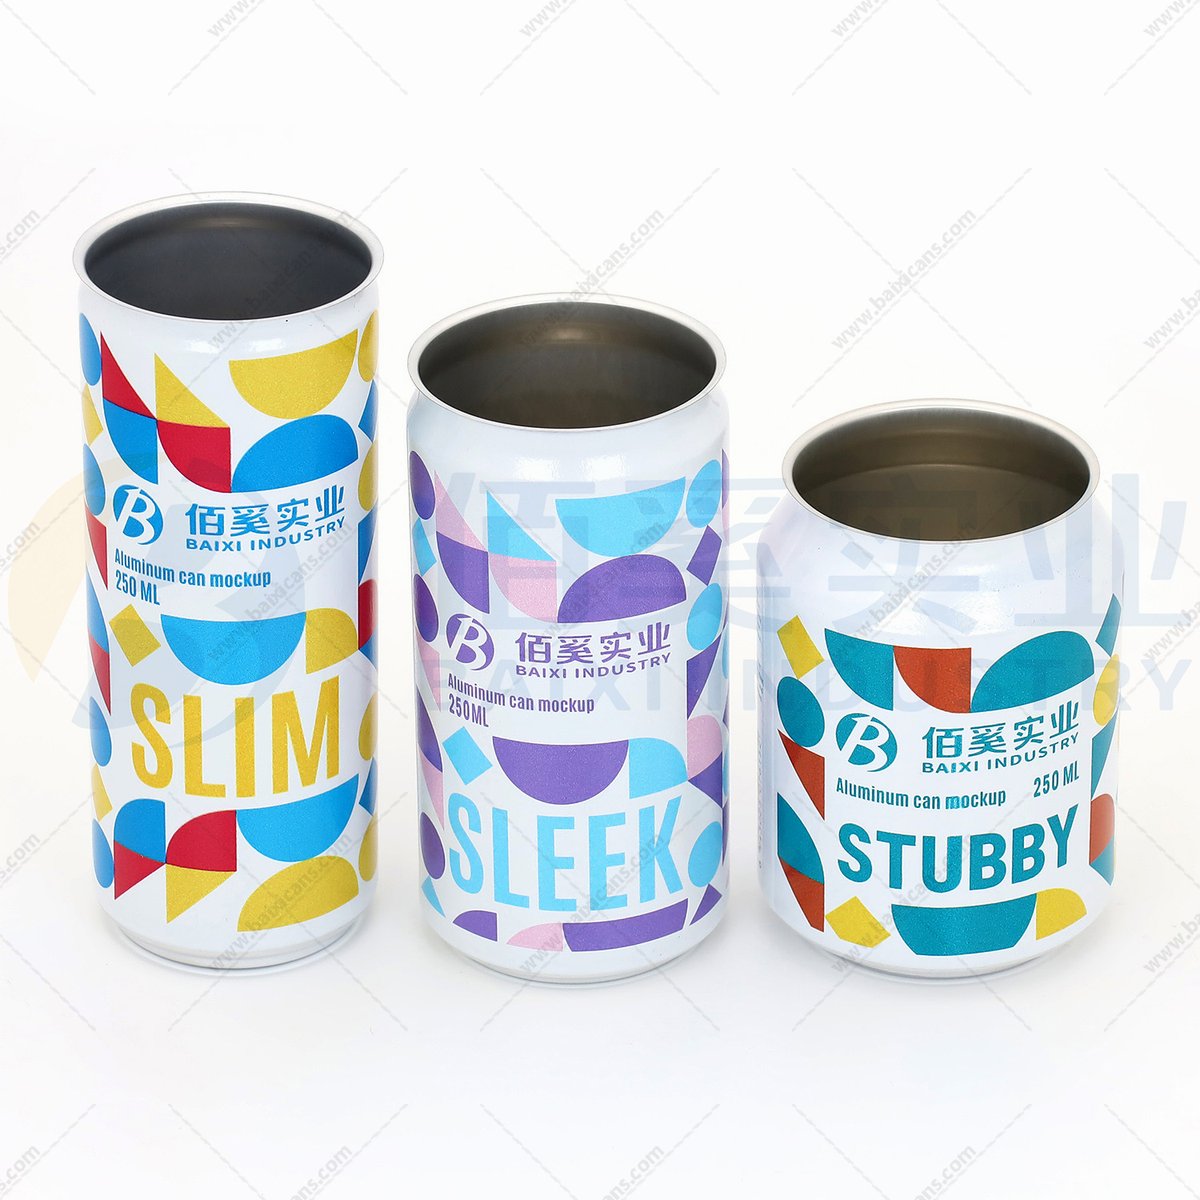 250ml slim, stubby, and sleek aluminum cans
Website:baixicans.com
Mob/Whatsapp:+8613310665015
#aluminumcans #beercan #sodacan #brewery #craftbeer #beverage #aluminumbottle #packaging #fyp #foryourpage #foryou